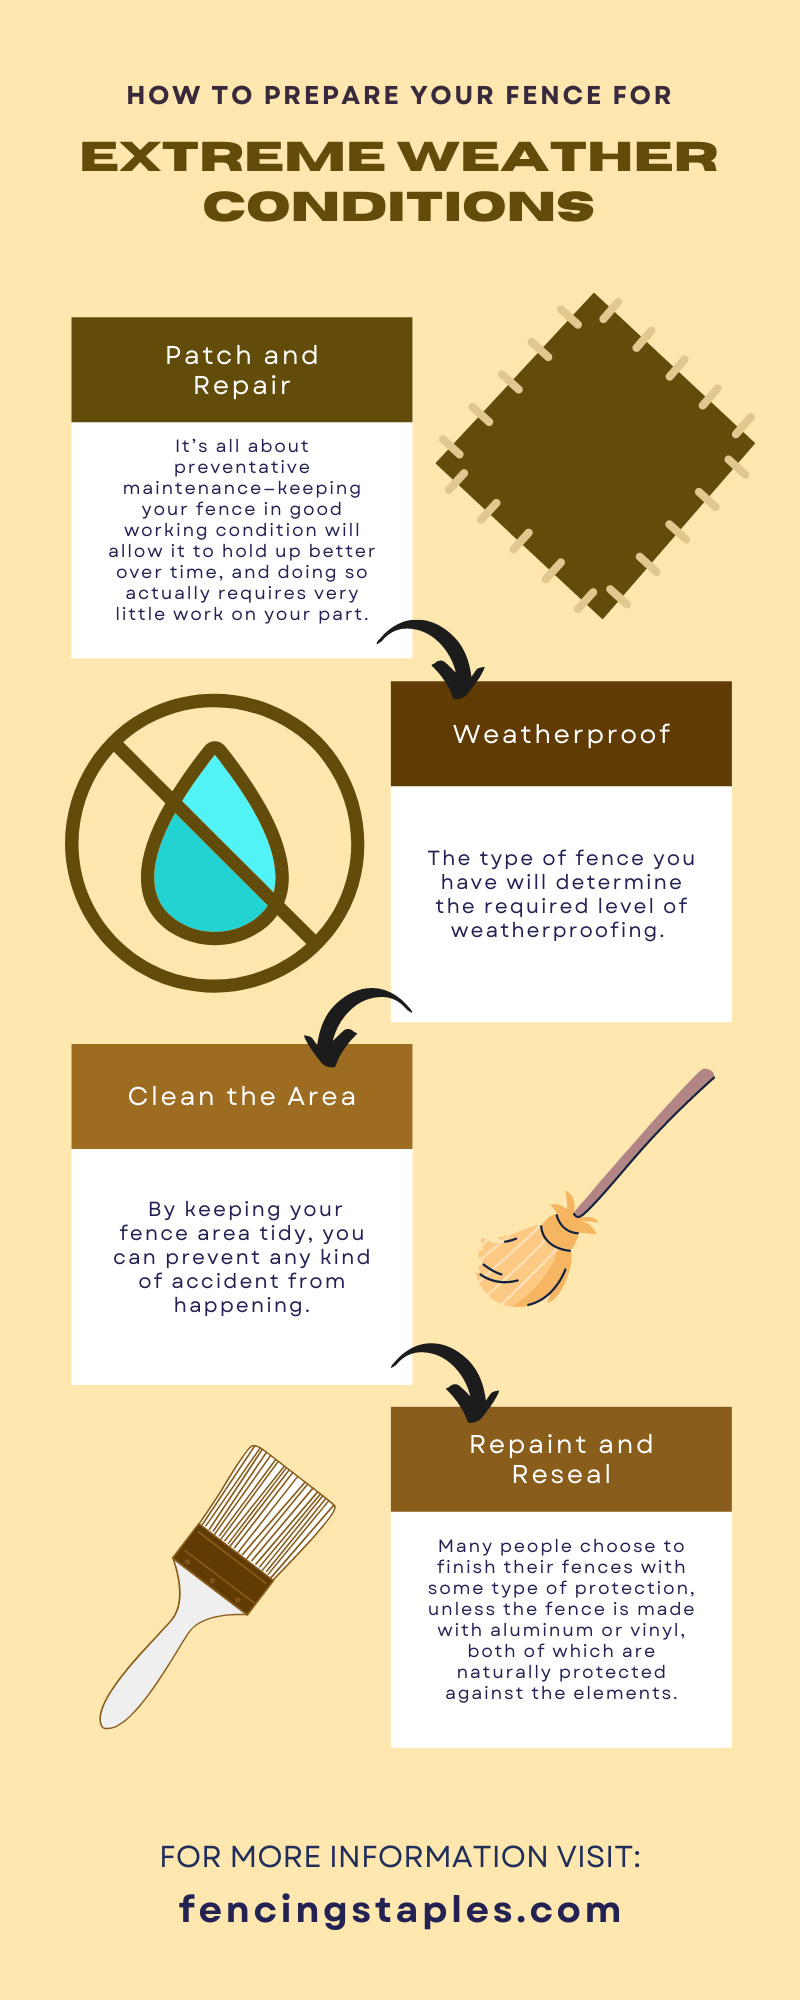 How To Prepare Your Fence for Extreme Weather Conditions